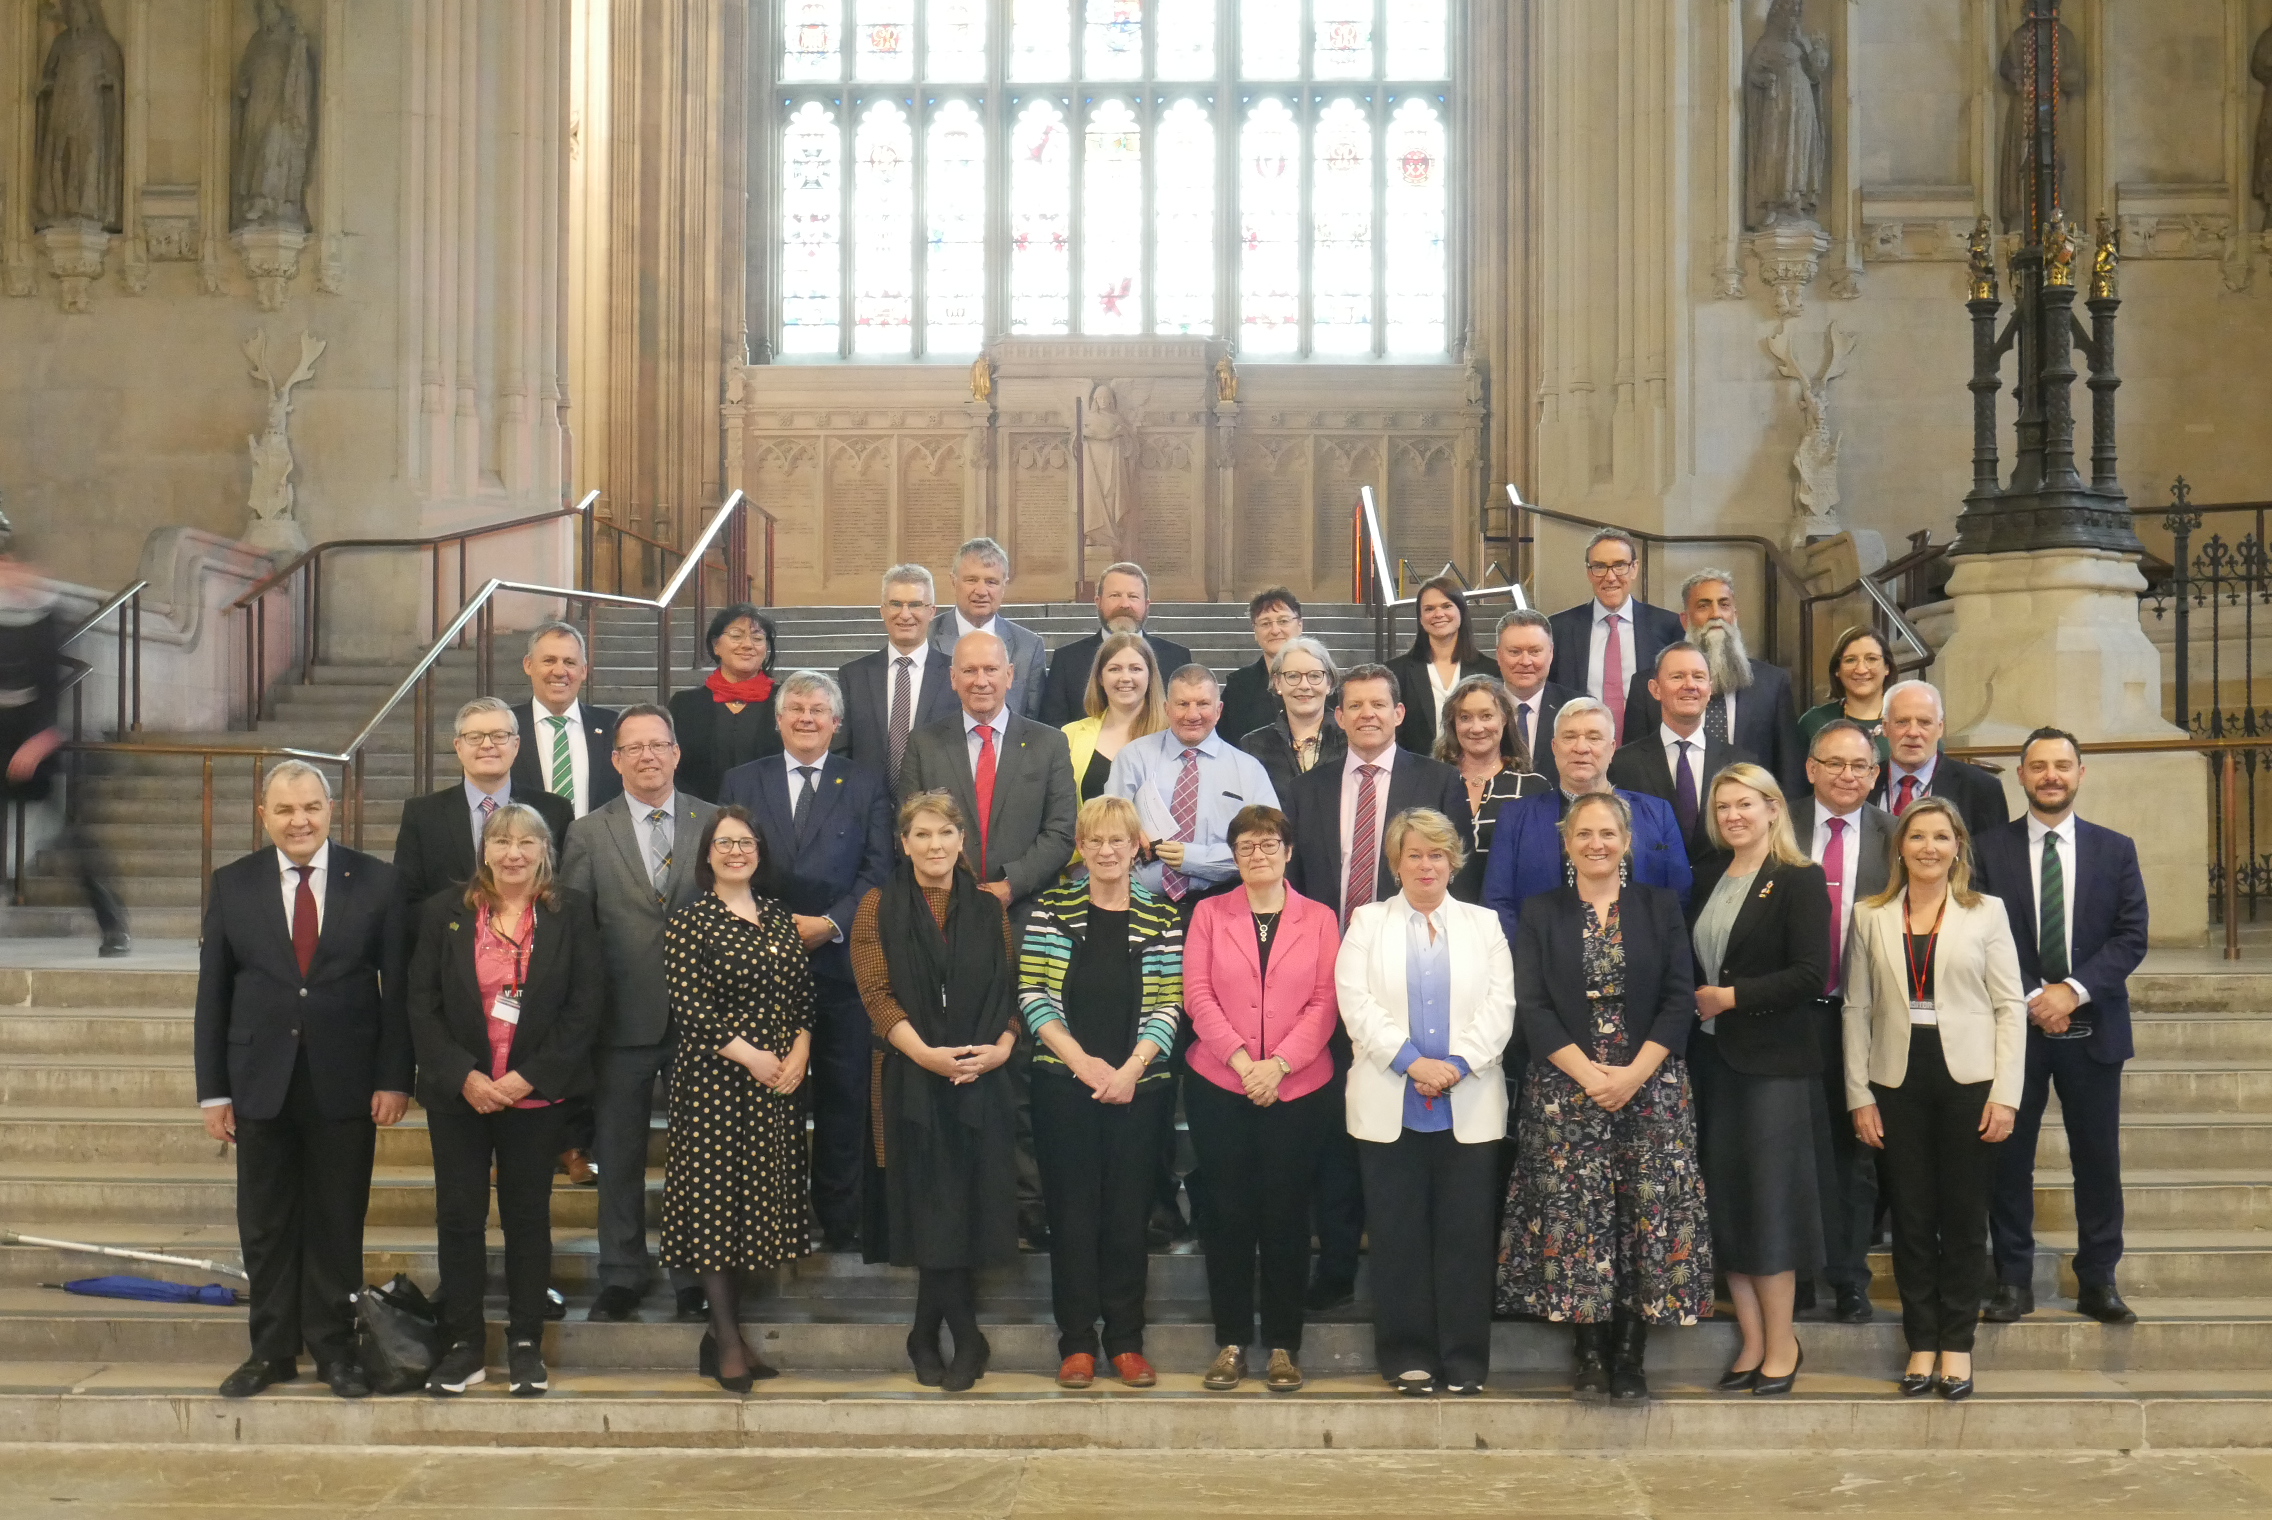 The delegates at the 2023 CPA BIMR Conference, hosted by CPA UK in Westminster